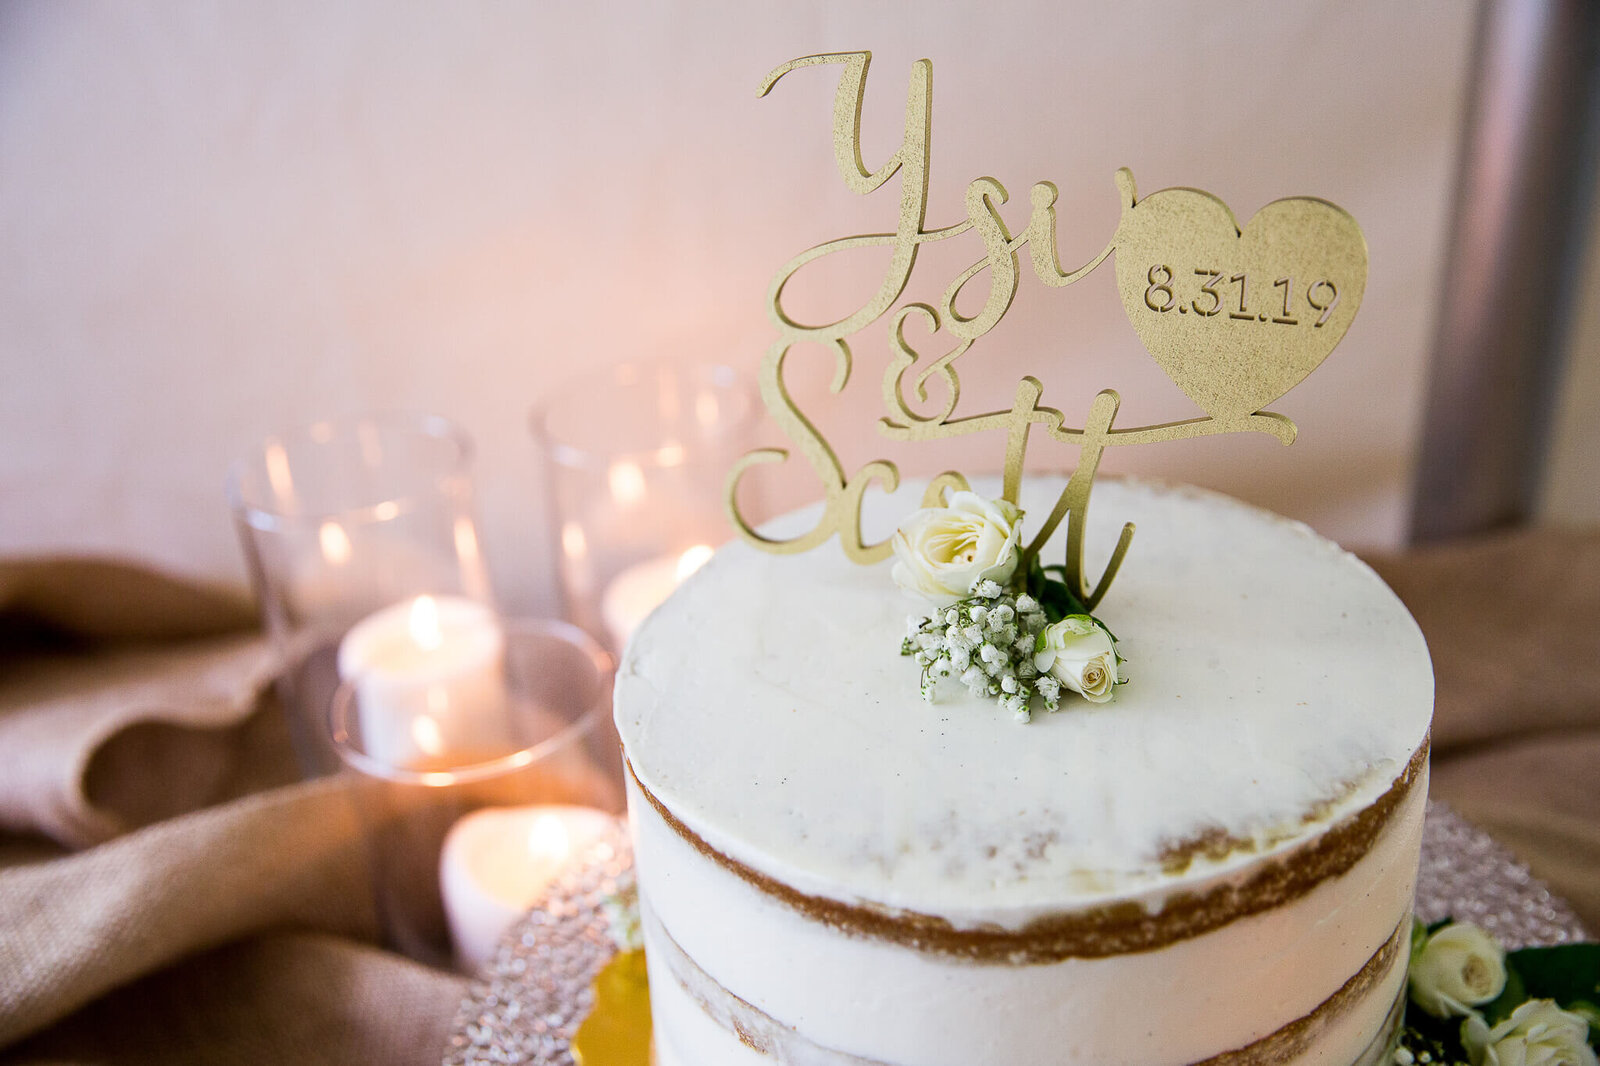 Naked wedding cake with flowers and couple name.